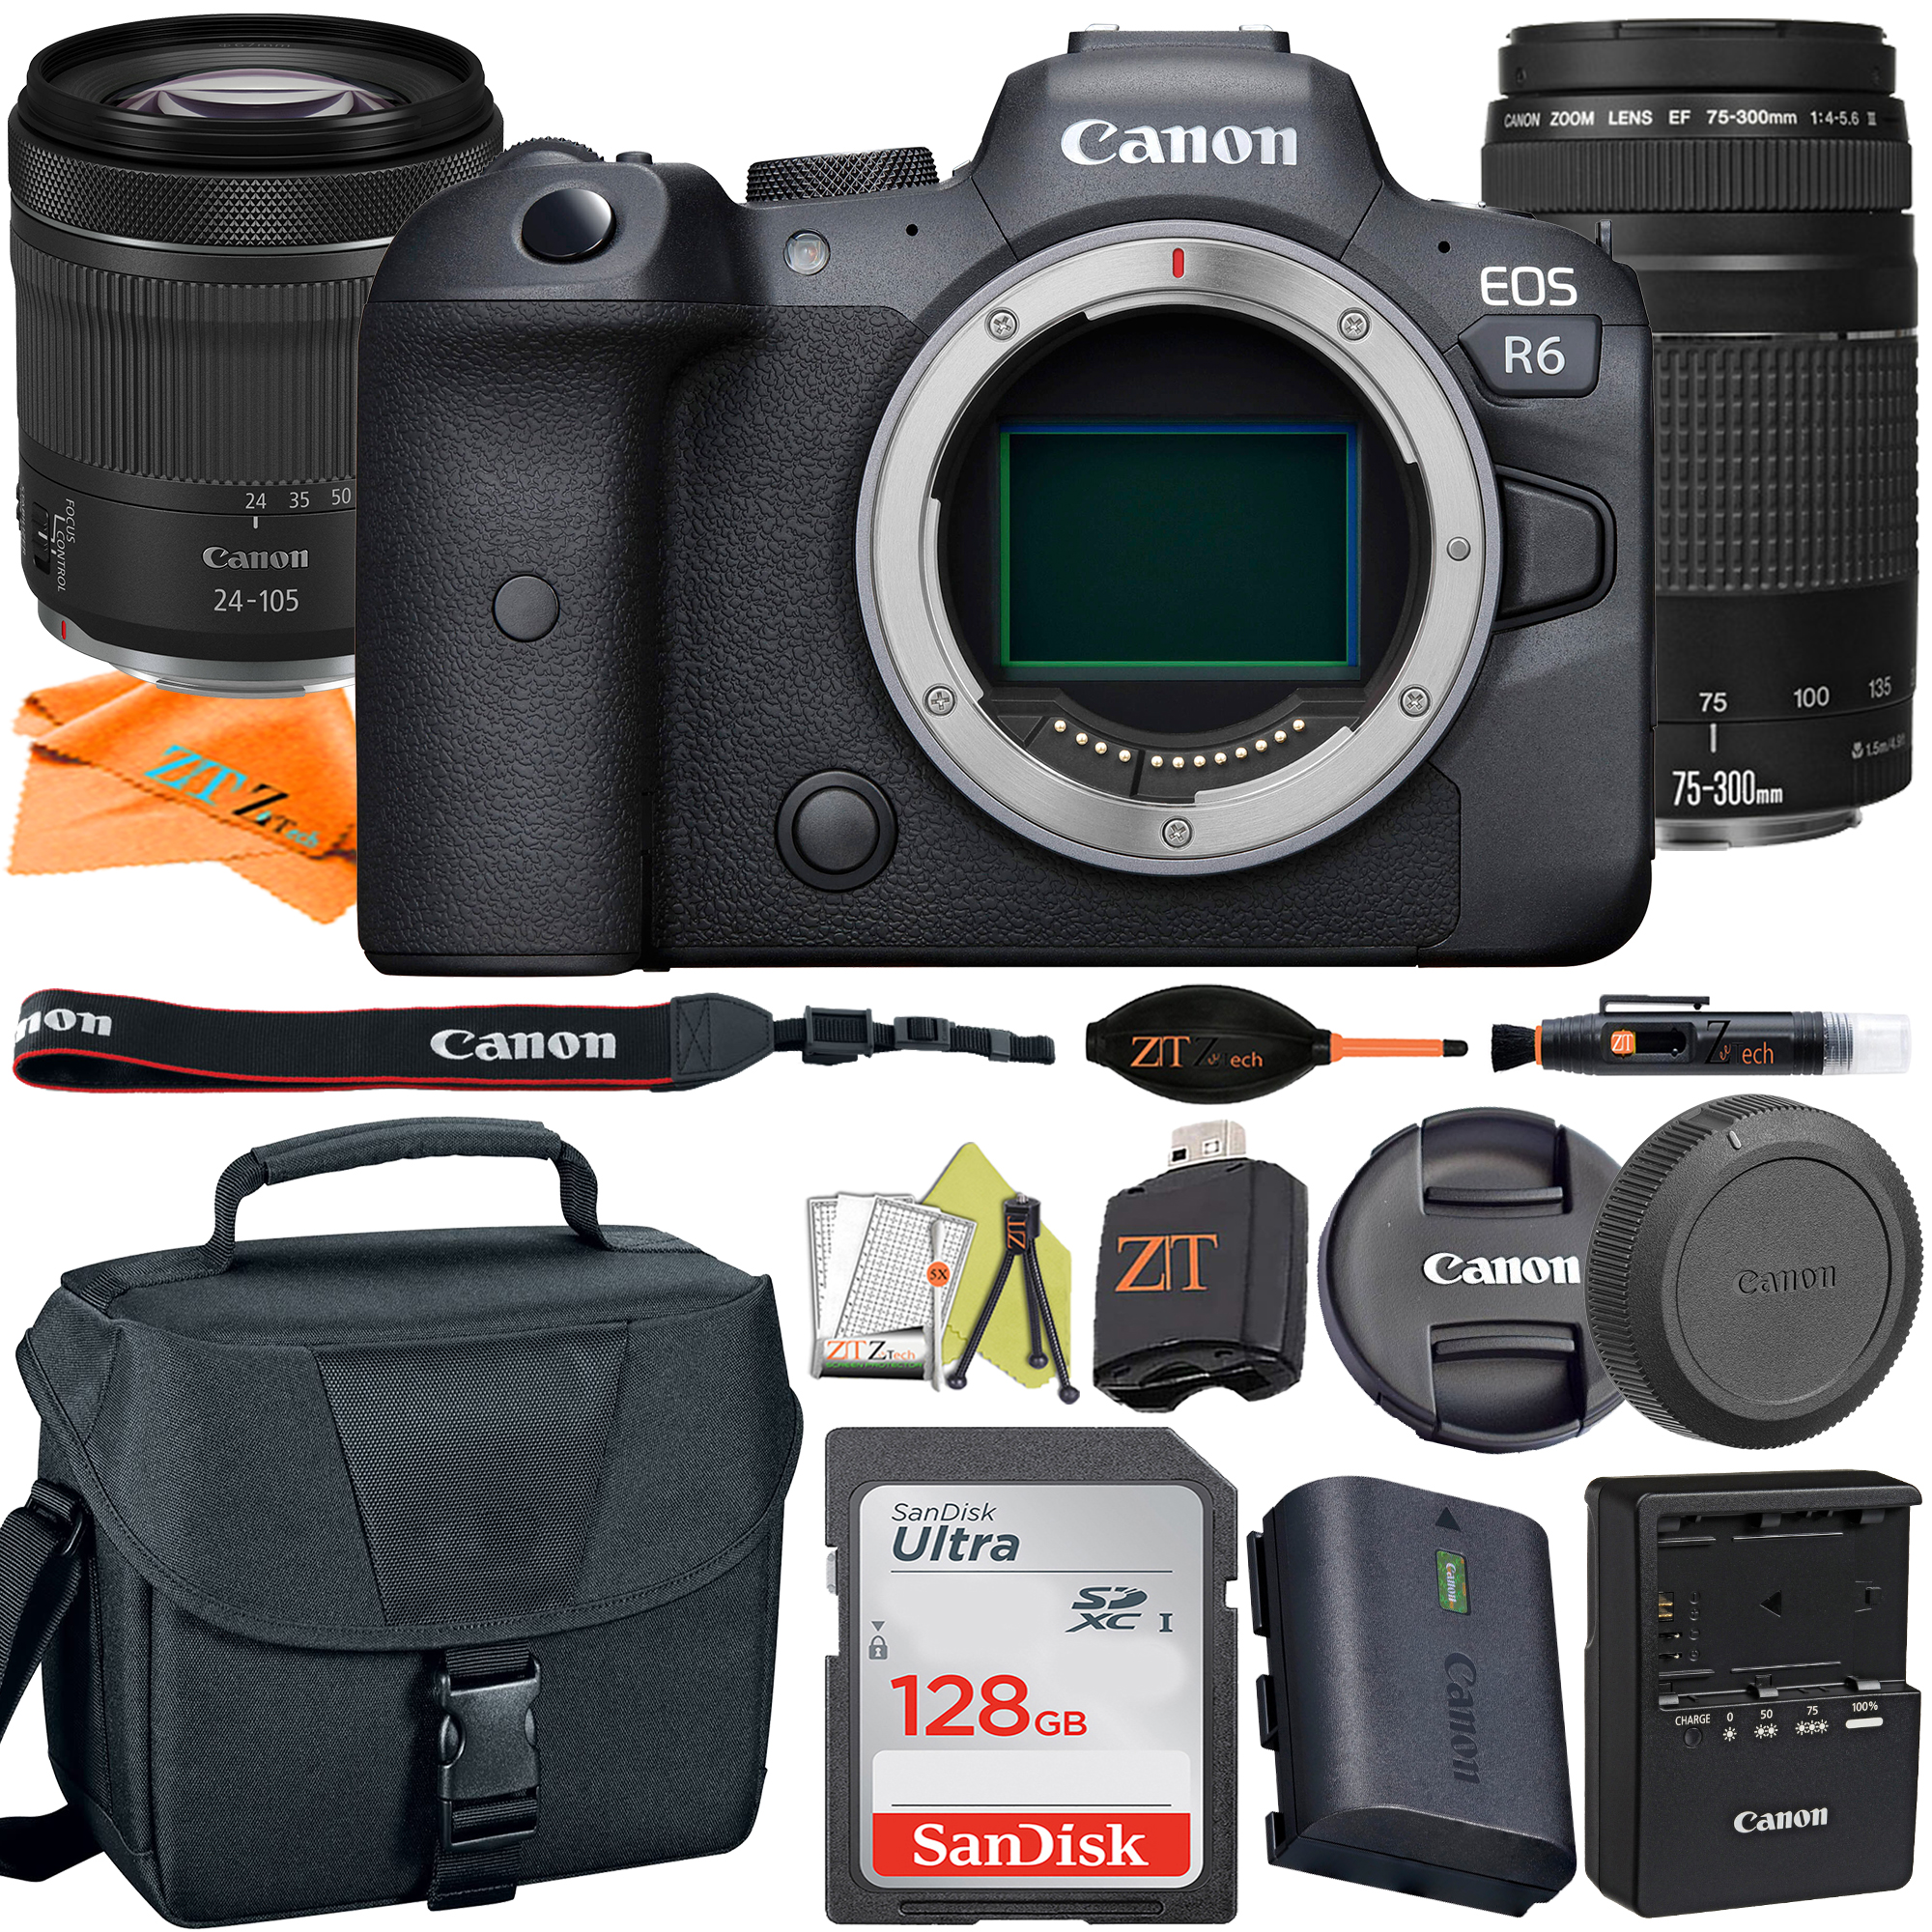 Canon EOS R6 Mirrorless Digital Camera with RF 24-105mm STM + 75-300mm Lens + SanDisk 128GB Card + Case + ZeeTech Accessory